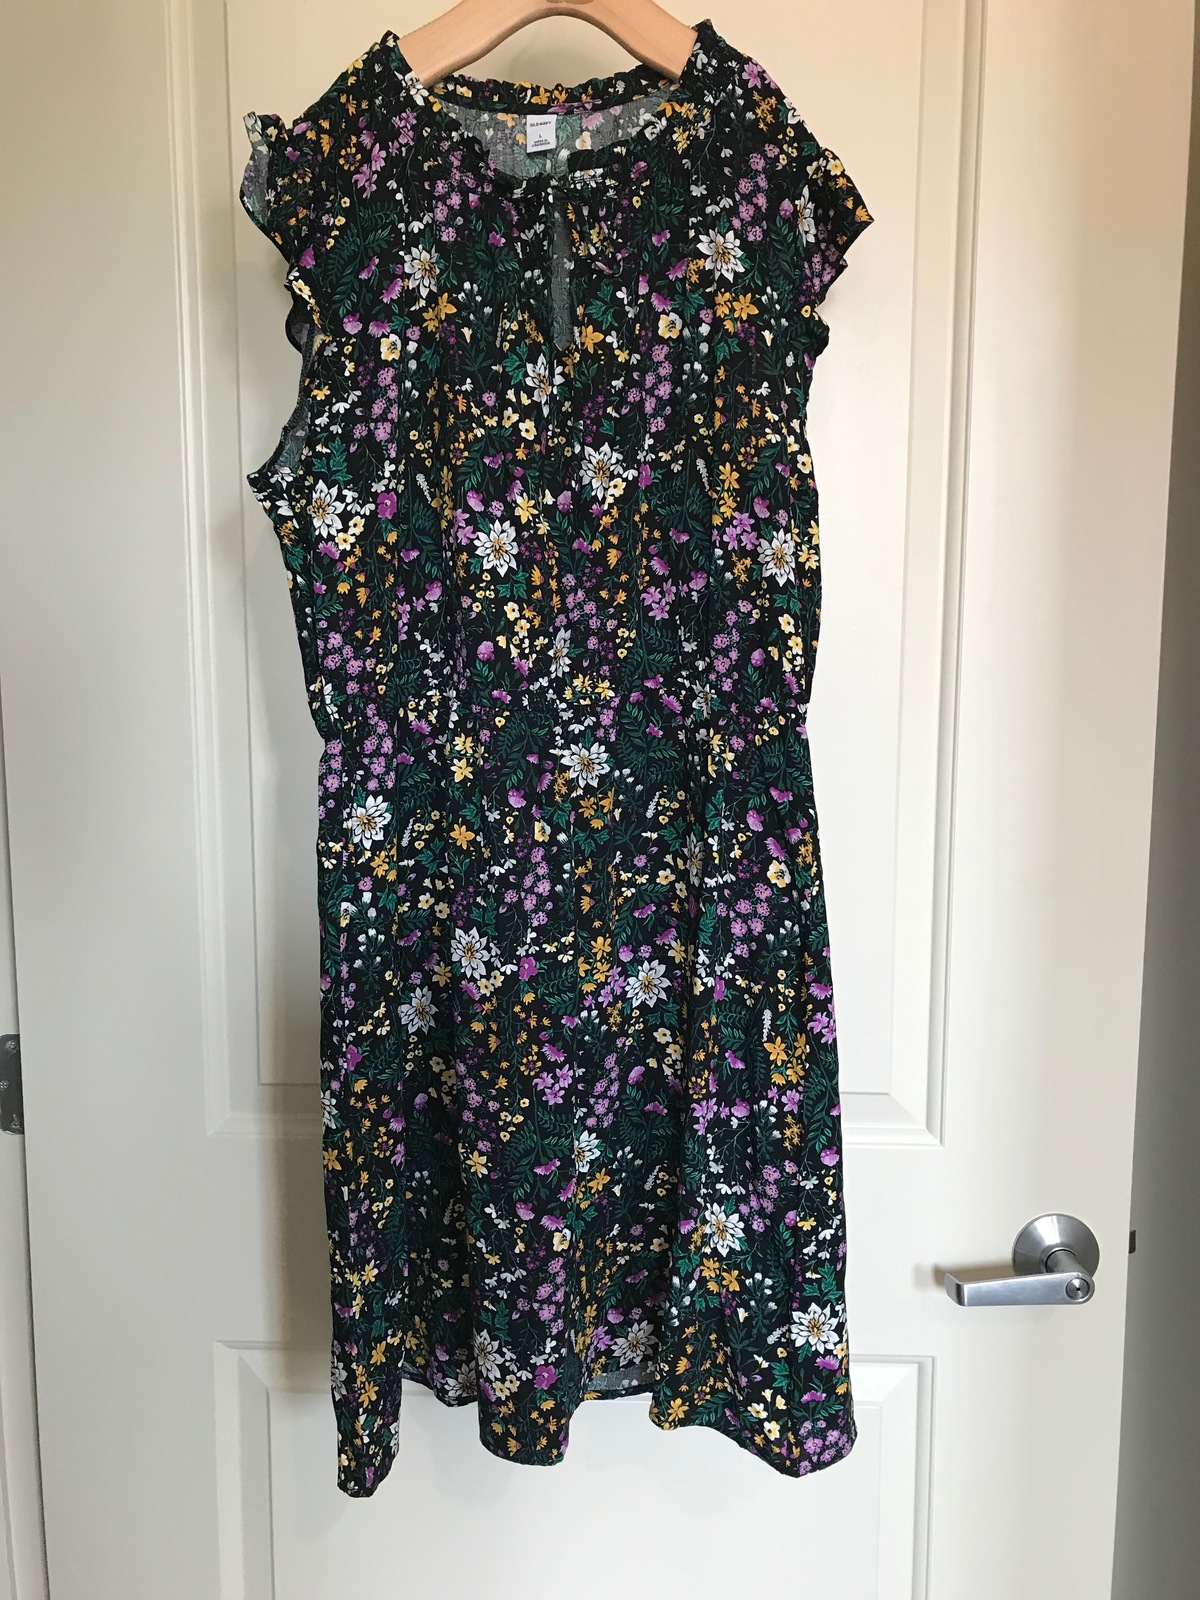 Old Navy Waist-Defined Tie-Neck Dress for Women similar to Alexis ...